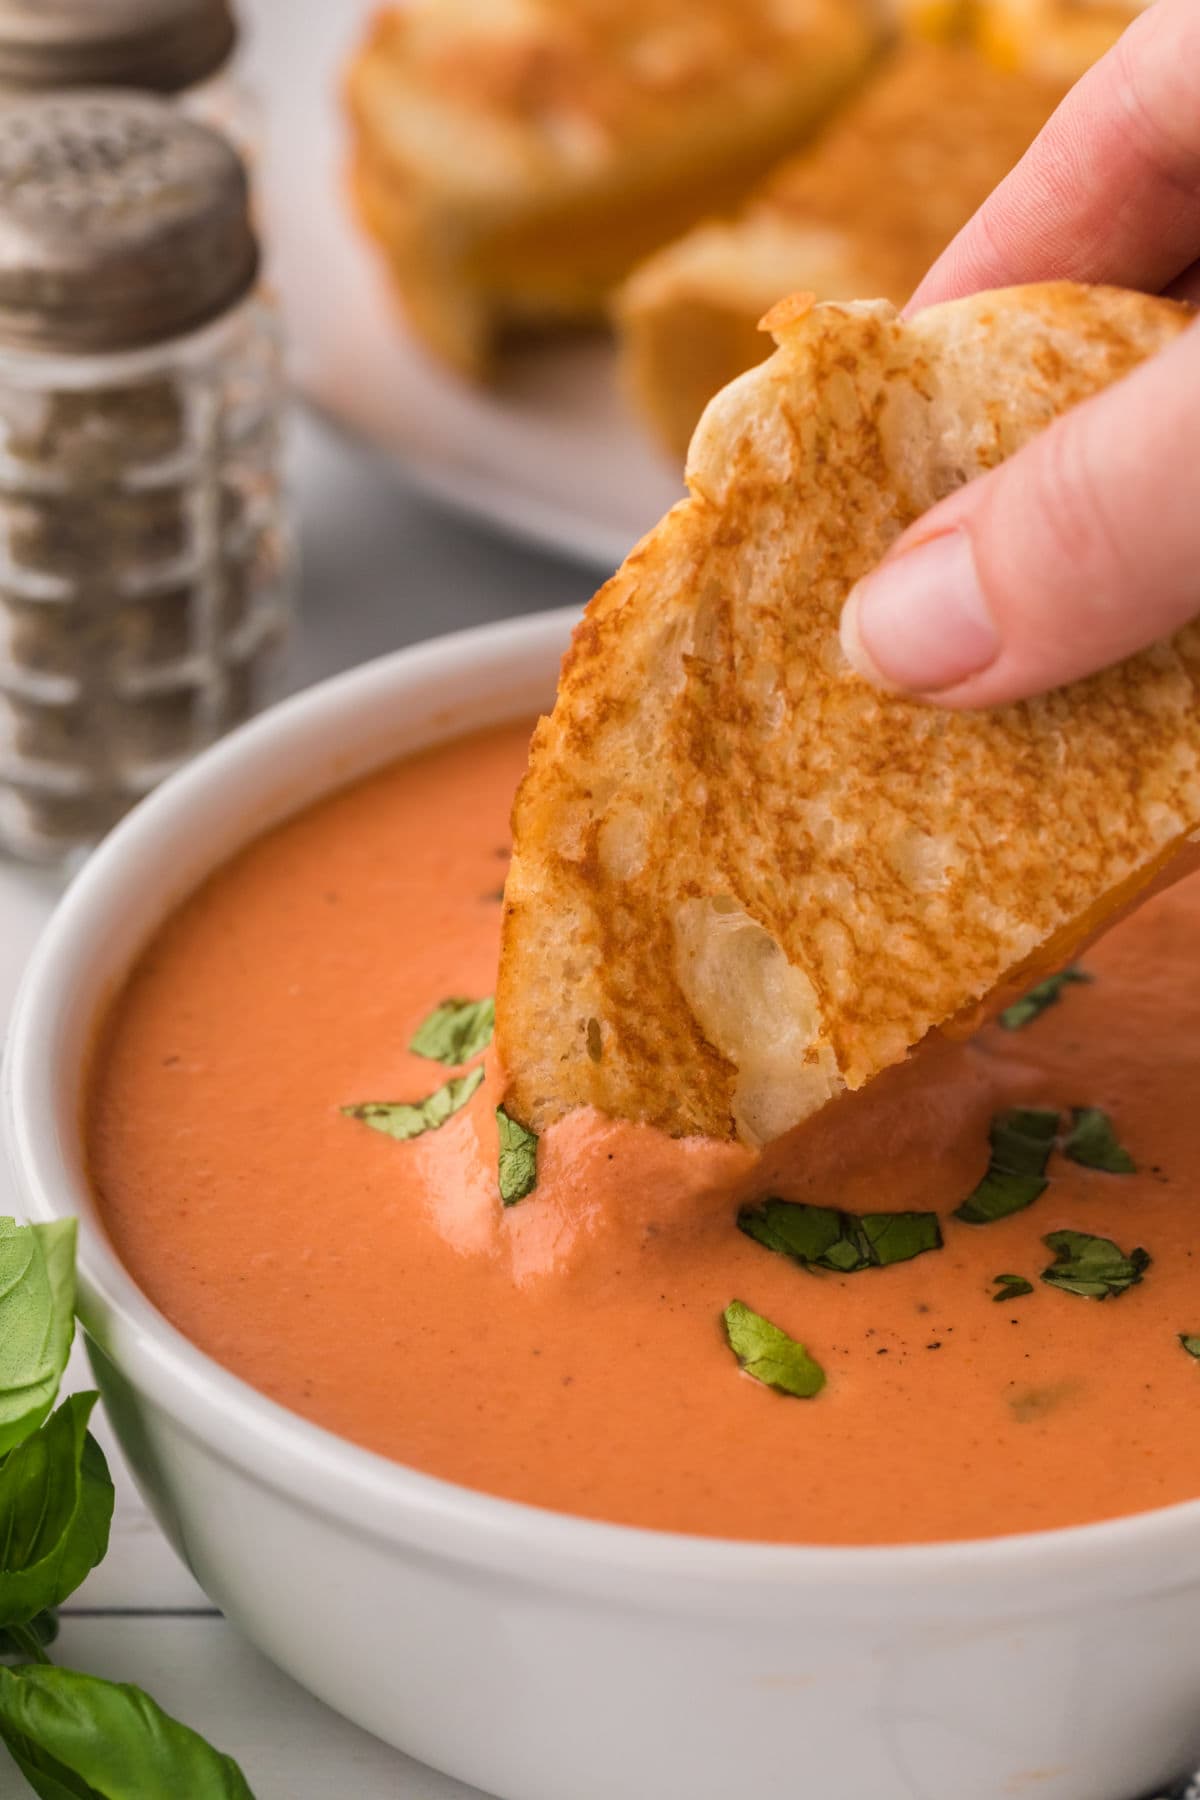 A bowl of tomato soup and a grilled cheese sandwich.